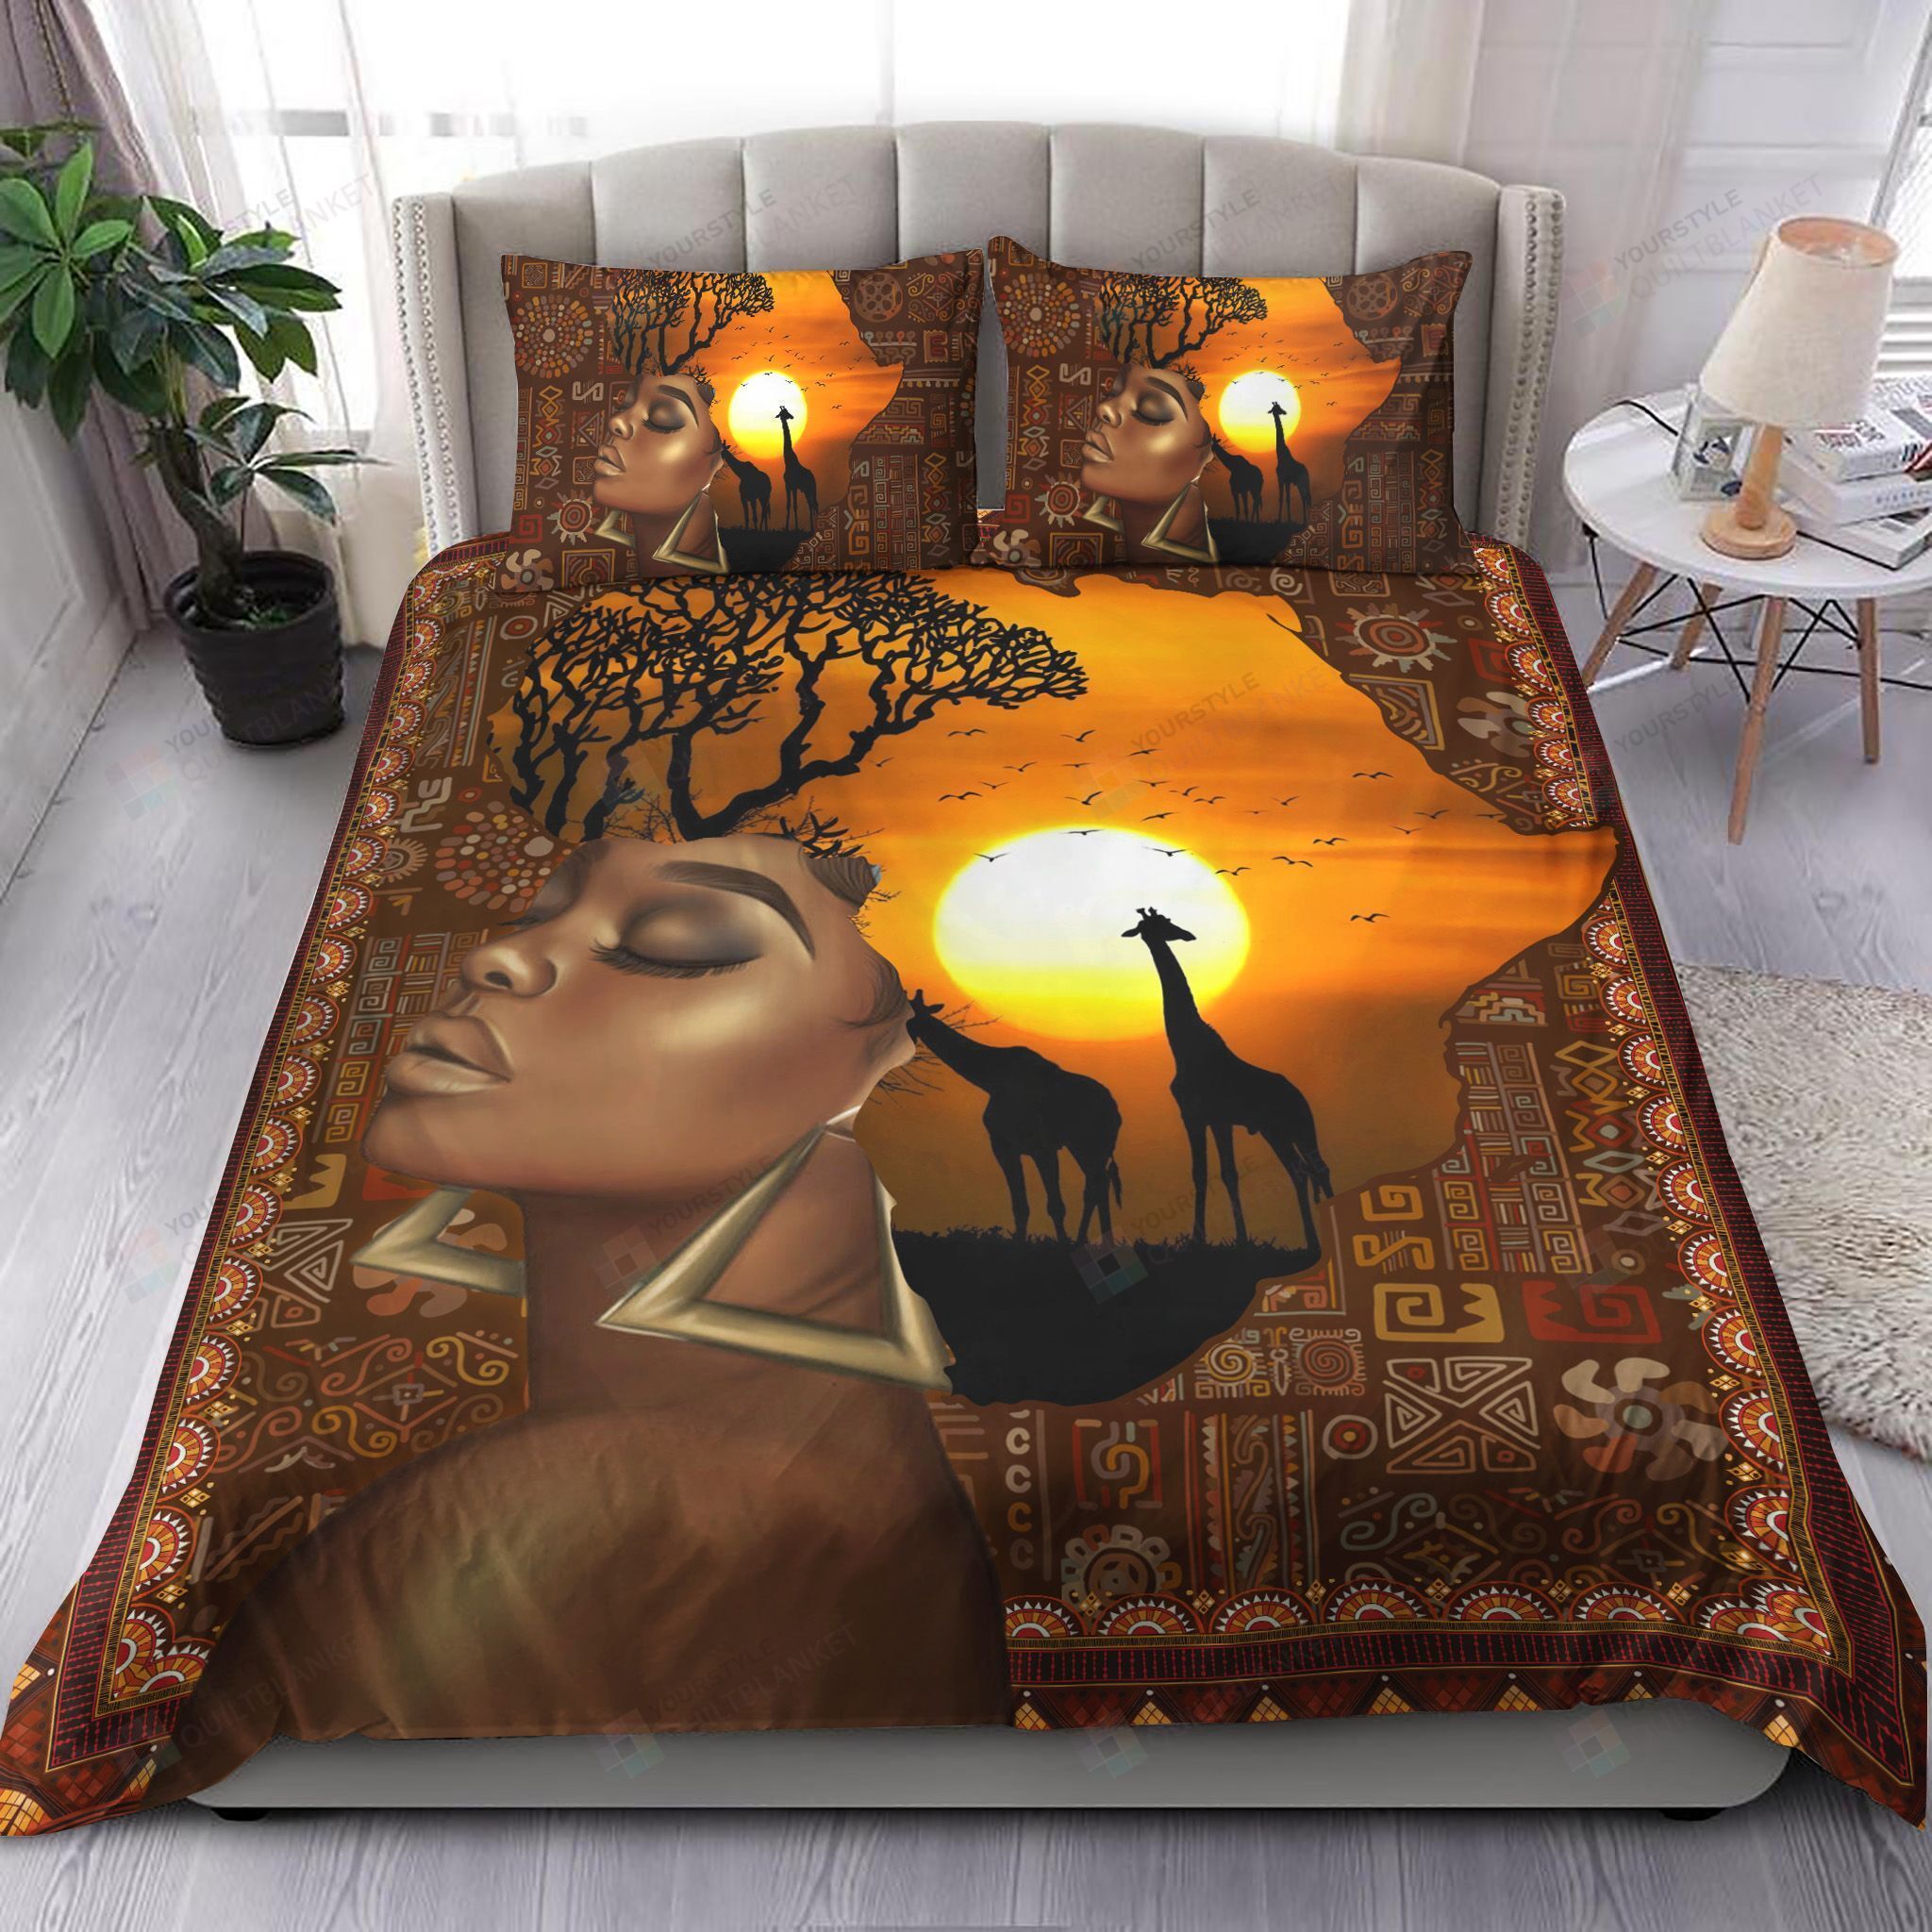 African Woman And Giraffe Bedding Set Bed Sheets Spread Comforter Duvet Cover Bedding Sets